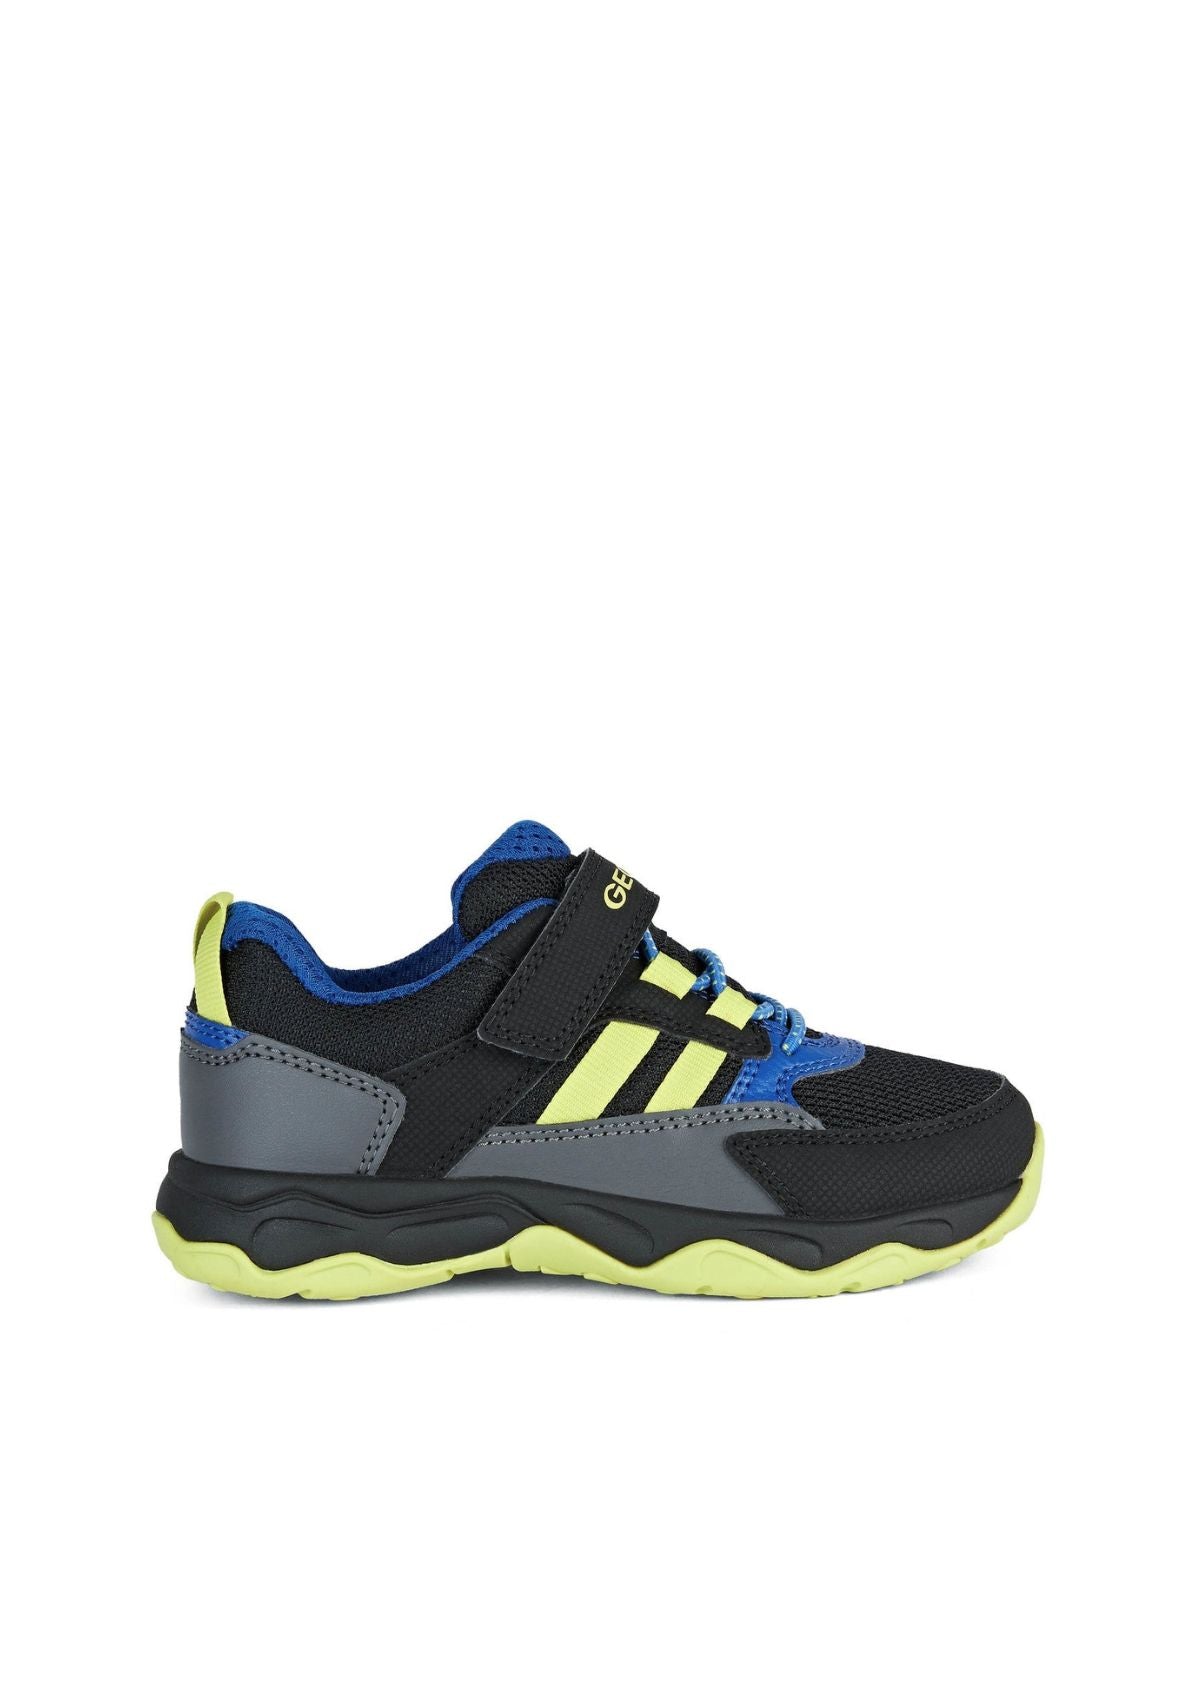 Geox Boys CALCO Trainers Black Lime  side